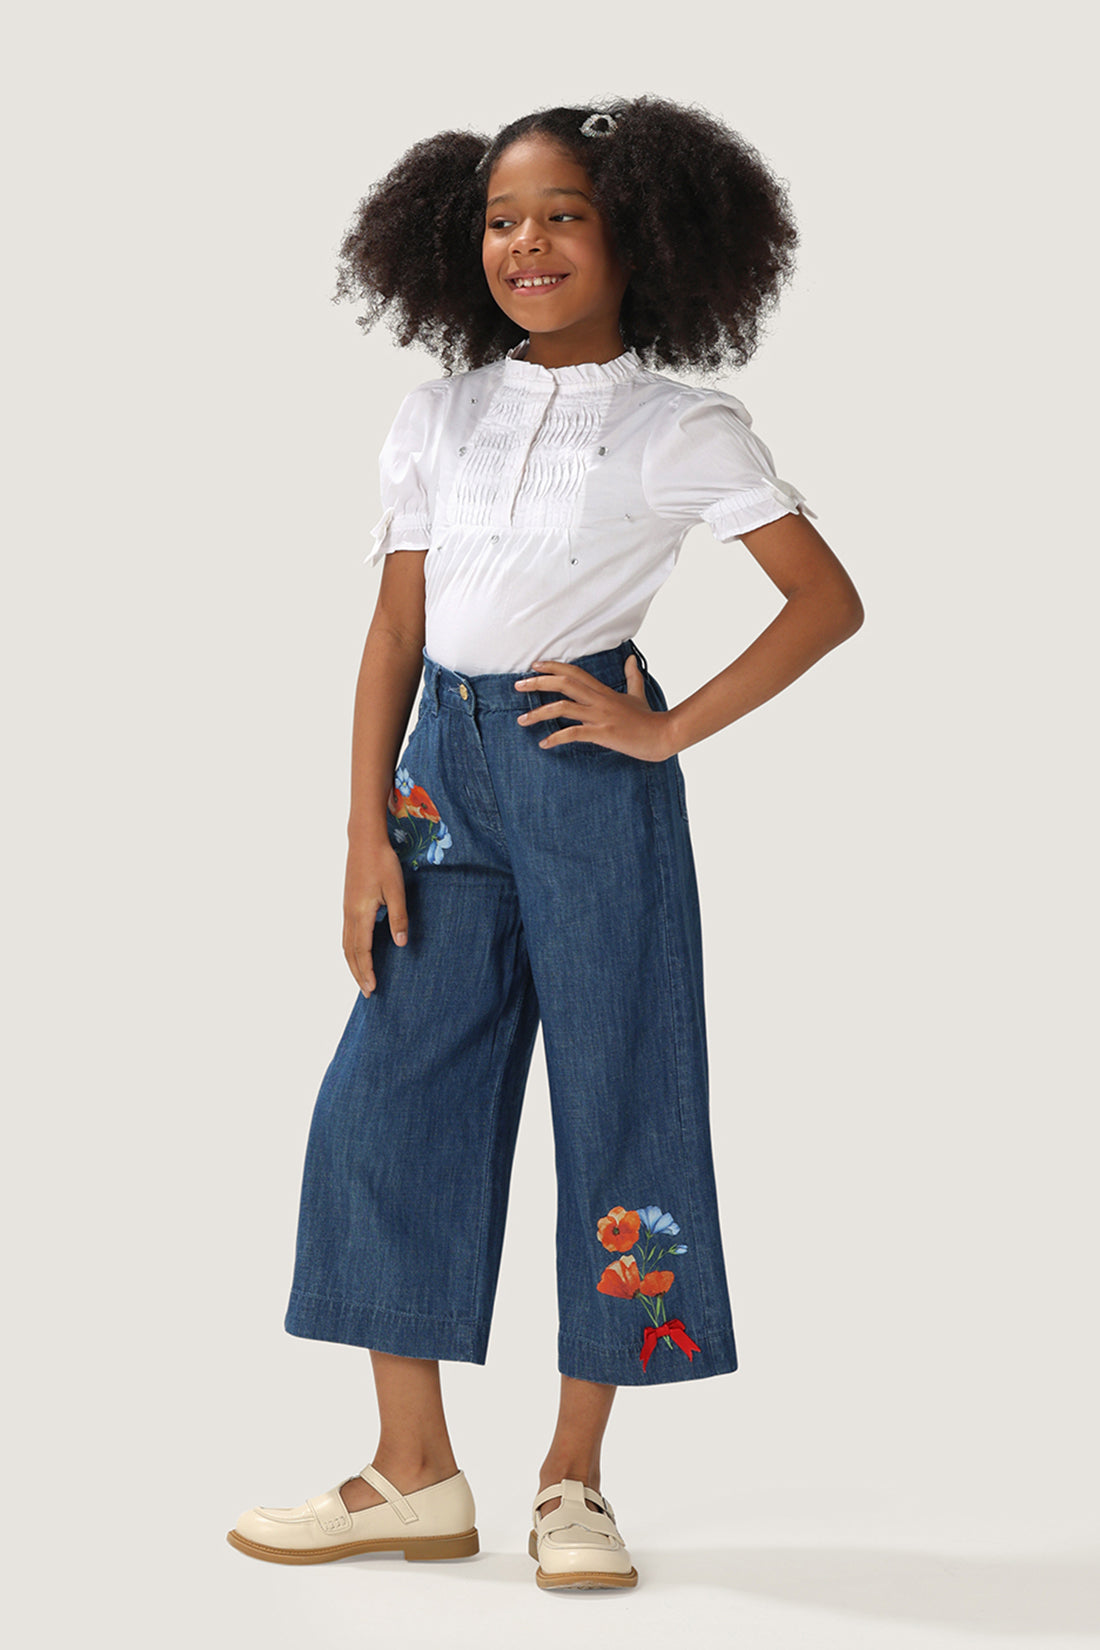 One Friday Kids Girls Floral Printed Blue Flared Pants